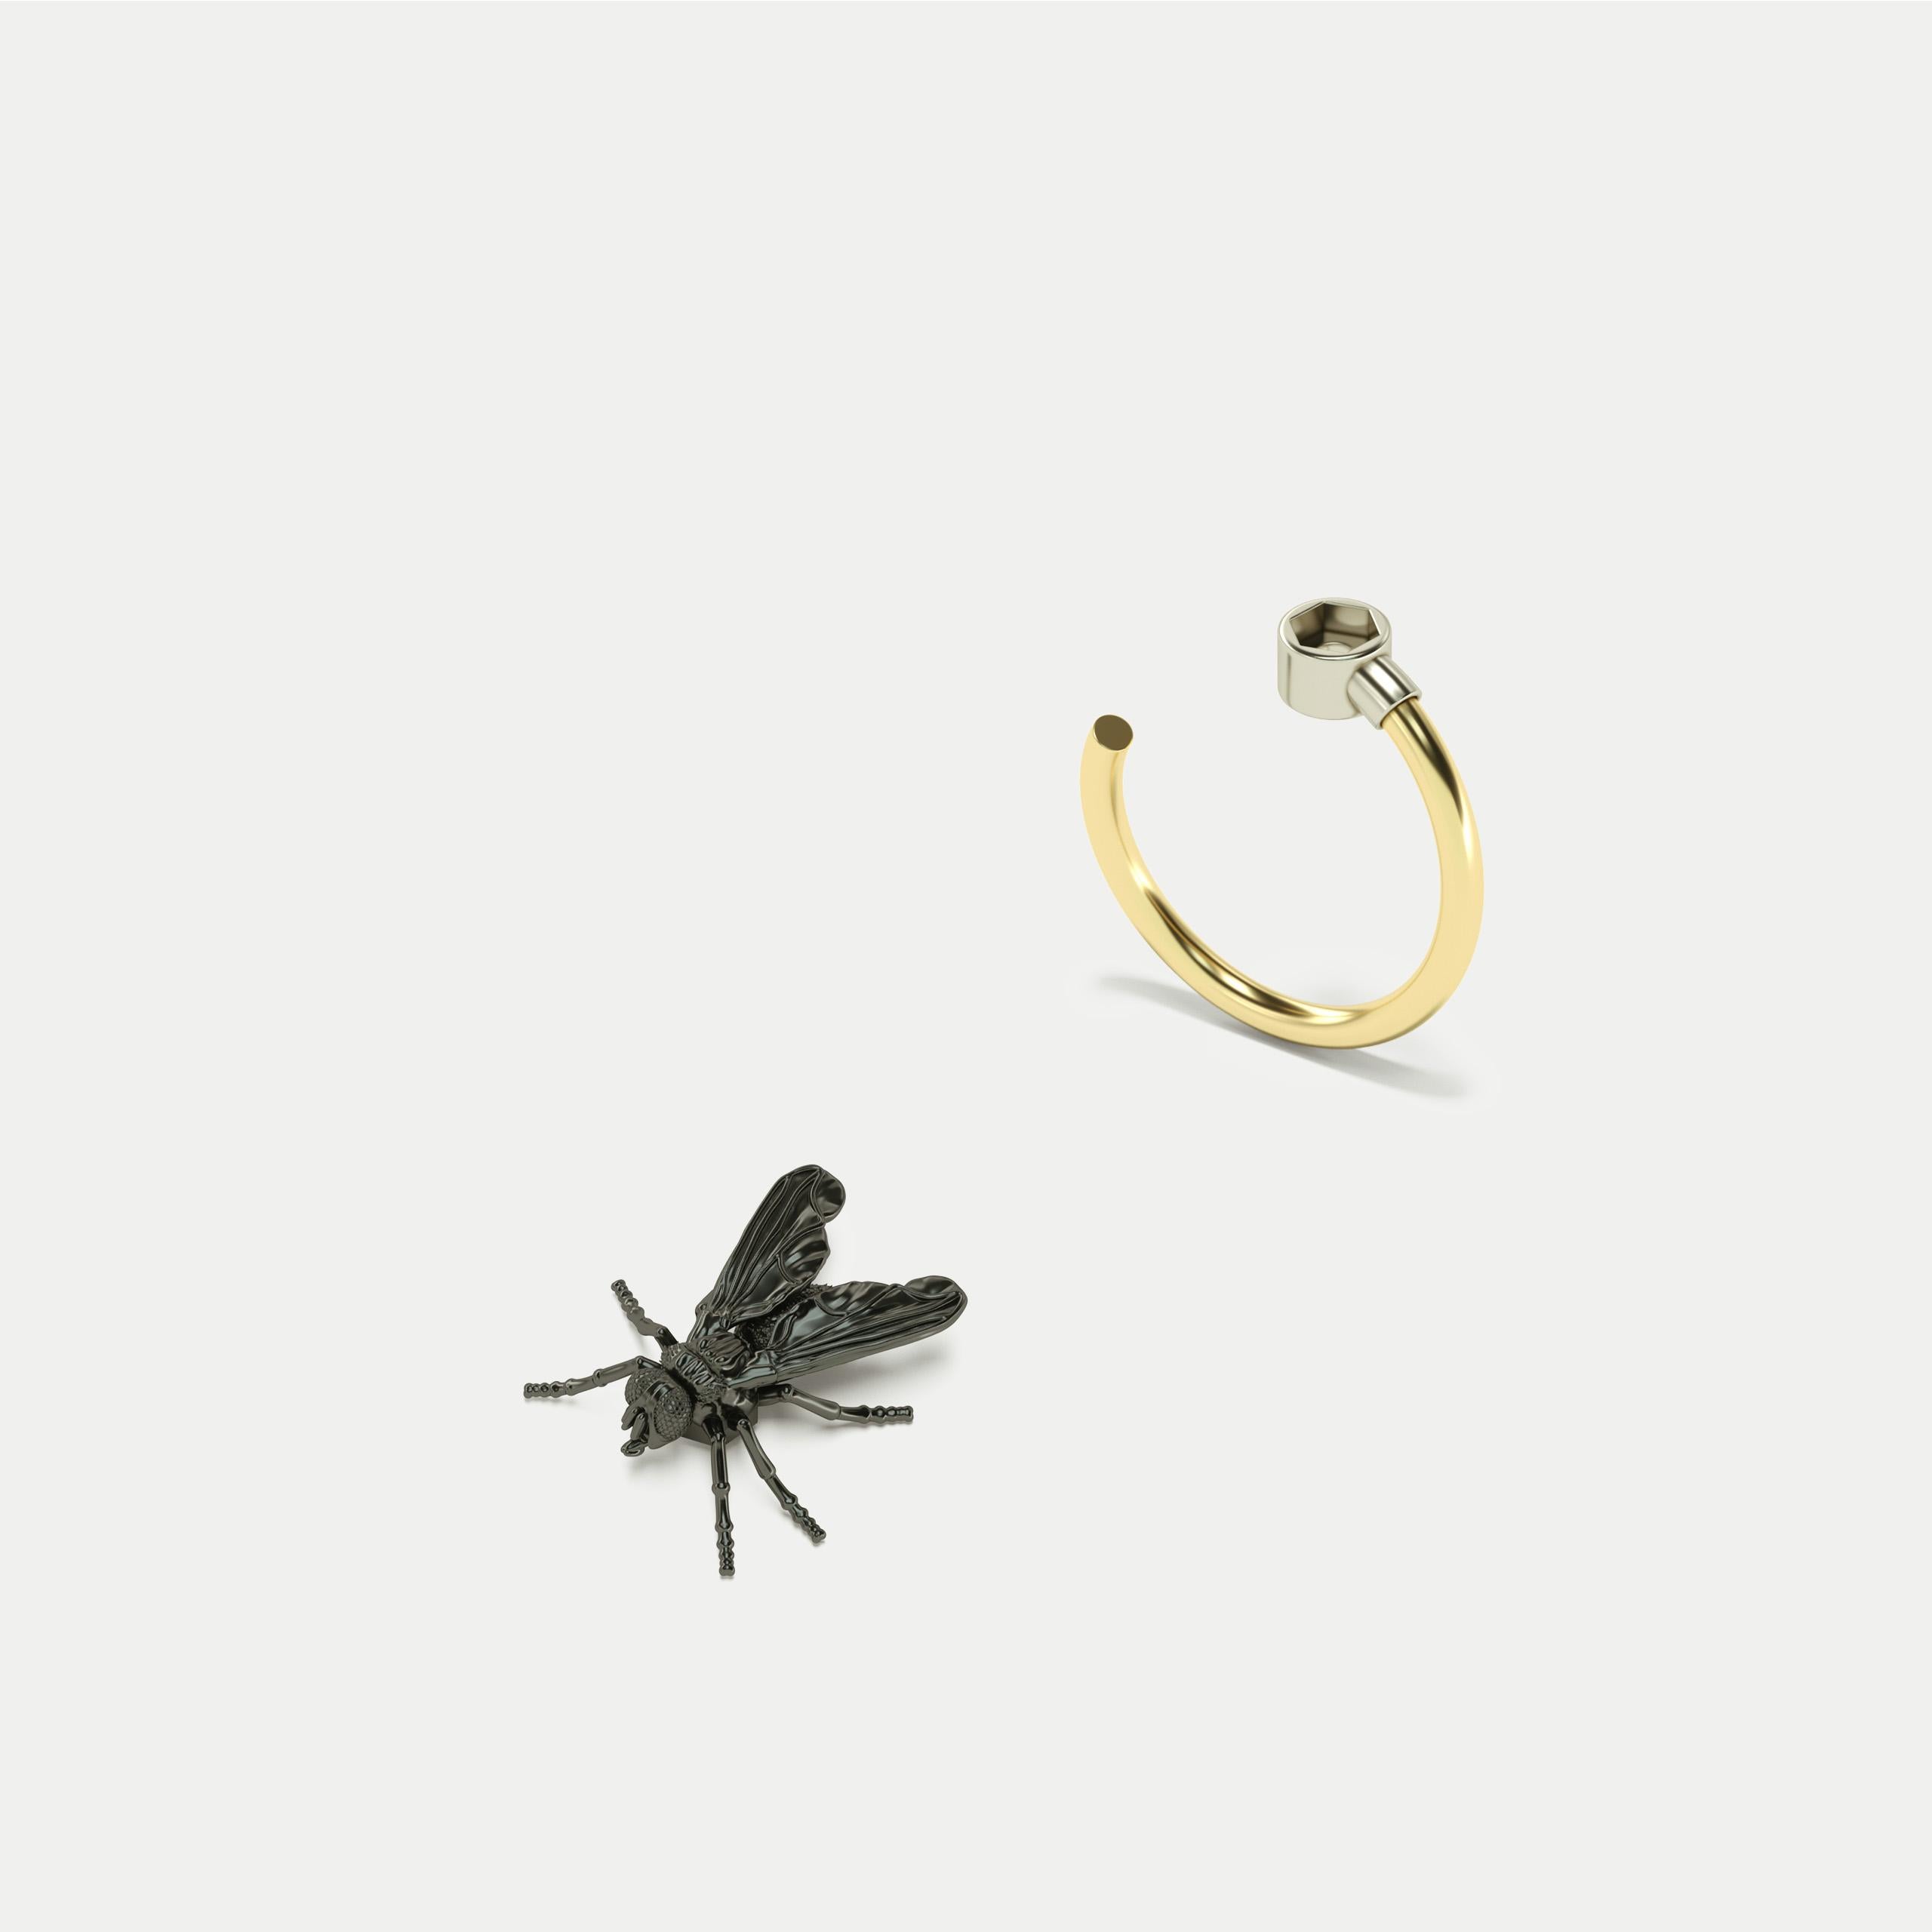 Tan France Auction Pick

- Yellow Gold 18K Ring
- Black Gold 18K Fly <

The ECH JEWELRY Collection is inspired by the world of insects, but not by the traditionally-accepted-as-beautiful butterflies. Flies and cockroaches, executed with stunning 